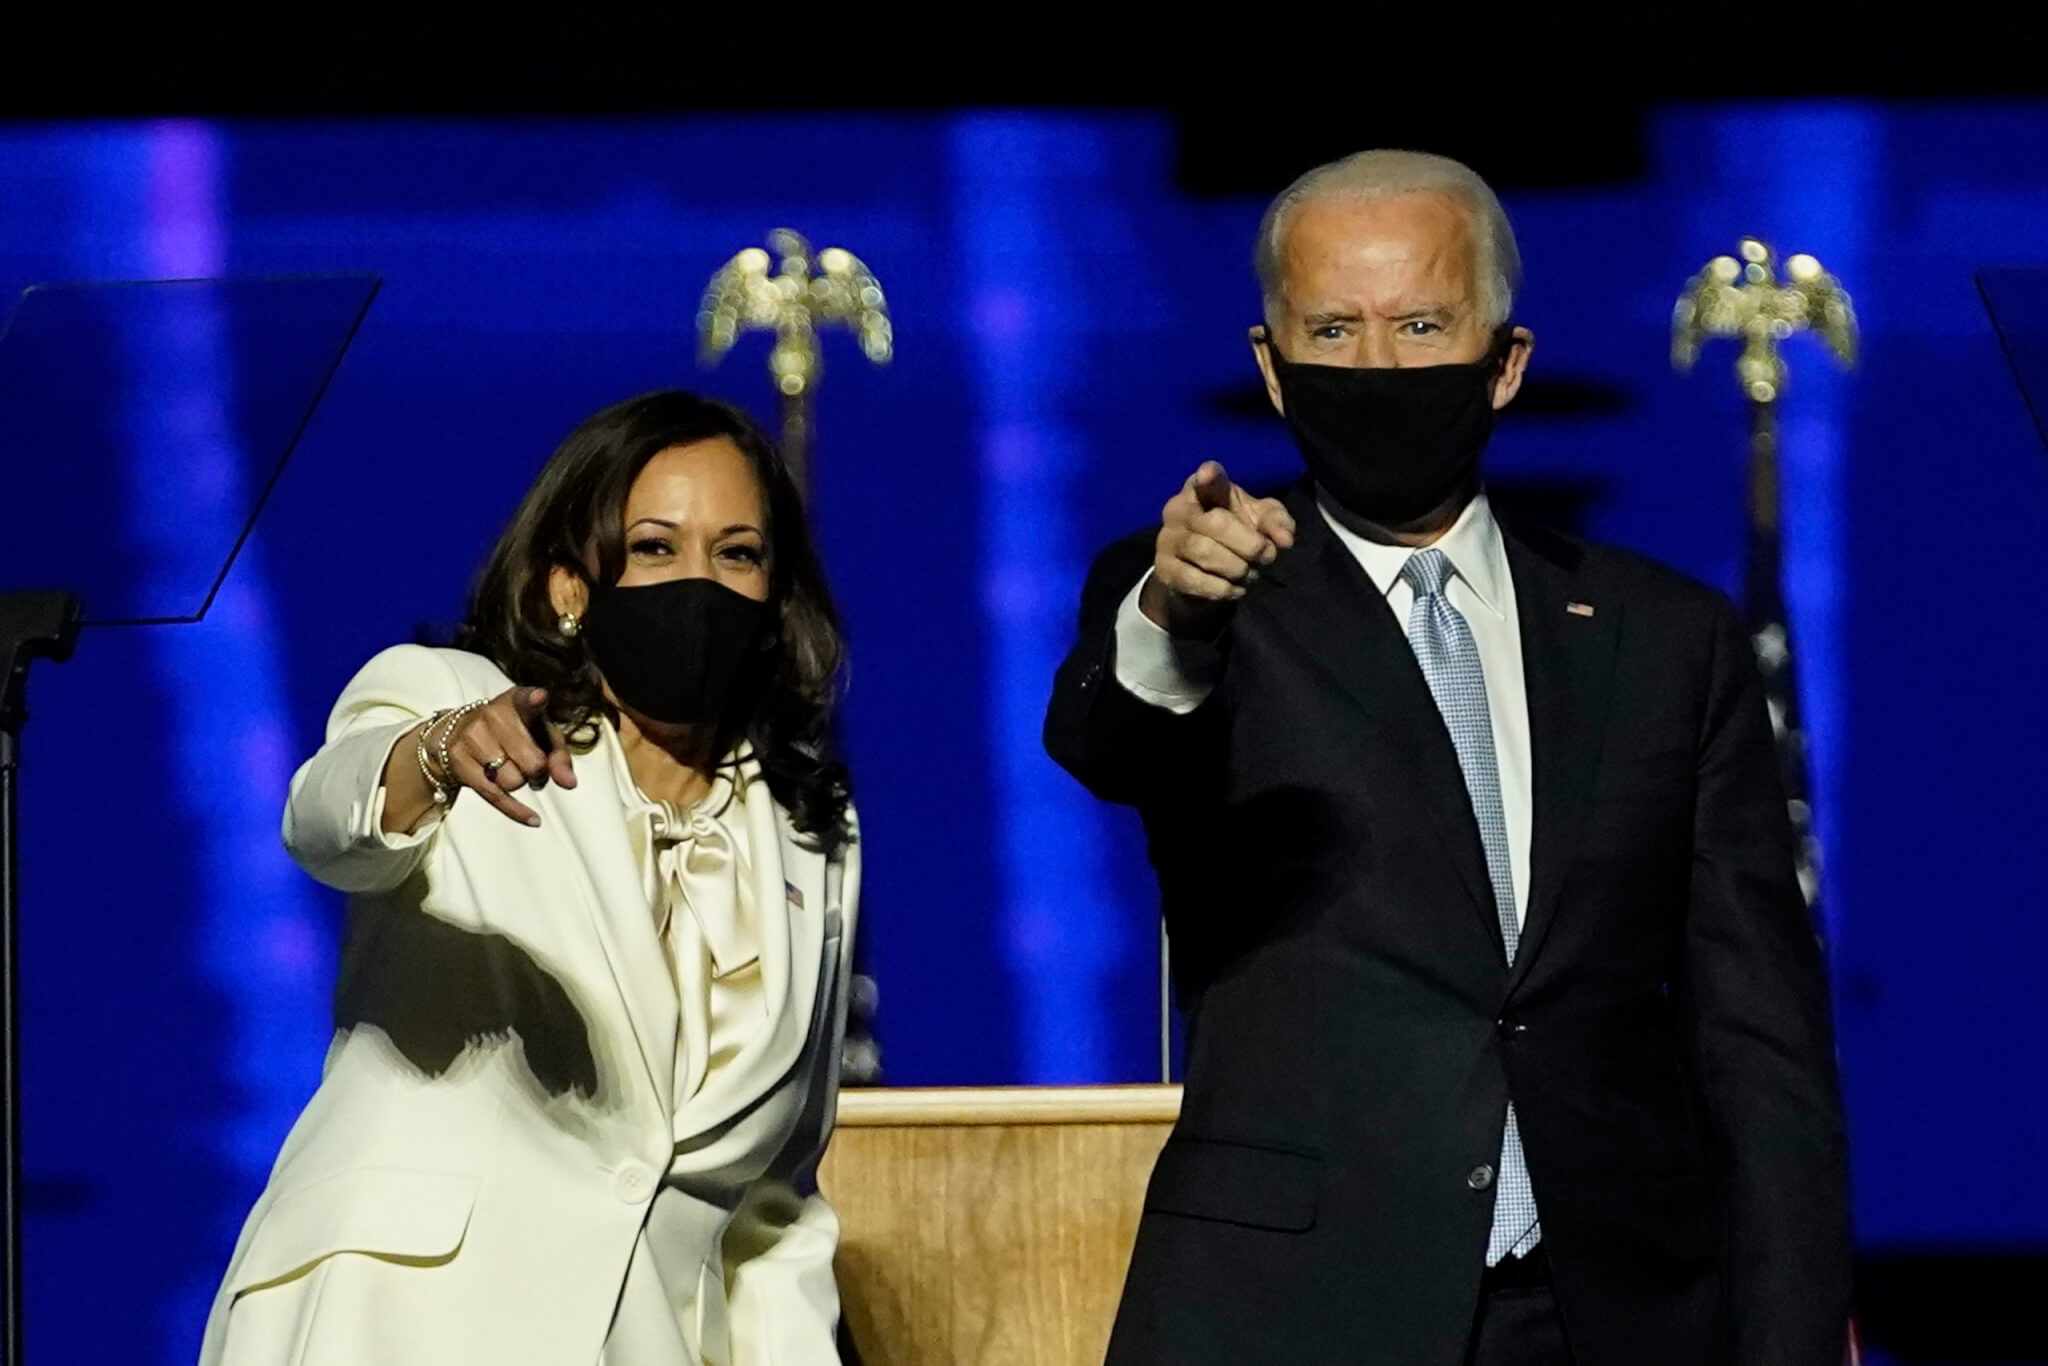 President elect Joe Biden and Vice President elect Kamala Harris deliver their victory speeches in Wilmington, Delaware, on Saturday, Nov. 7.